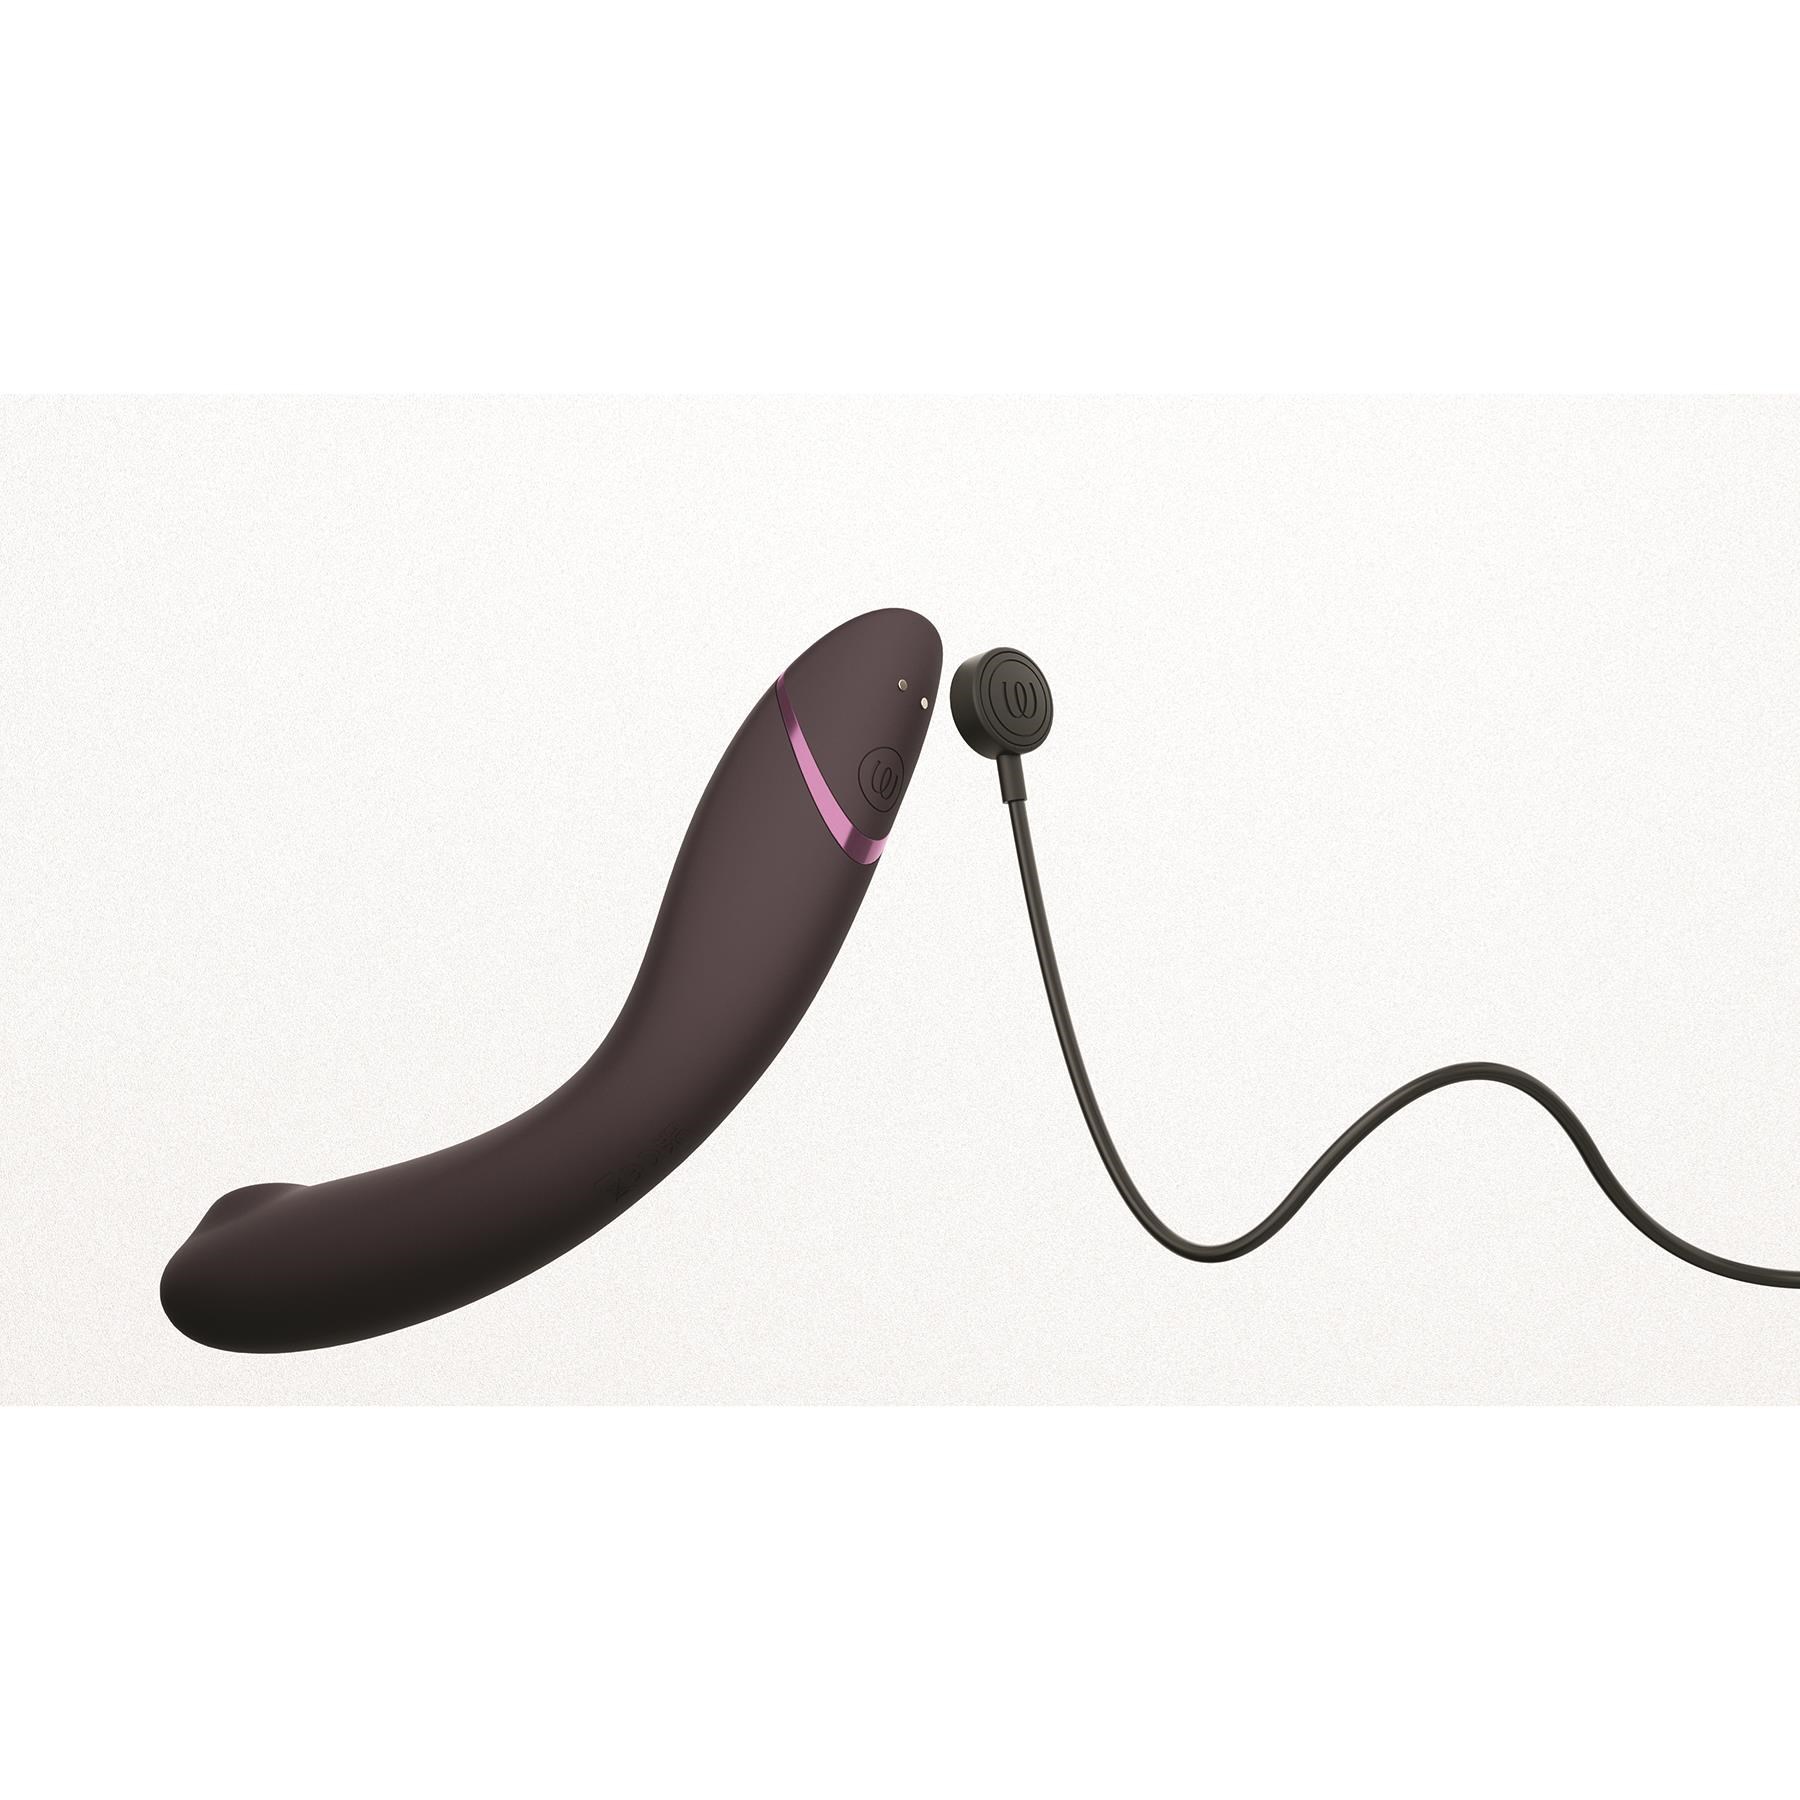 Womanizer OG Air Pleasure G-Spot Massager - Showing Where Charging Cable is Placed